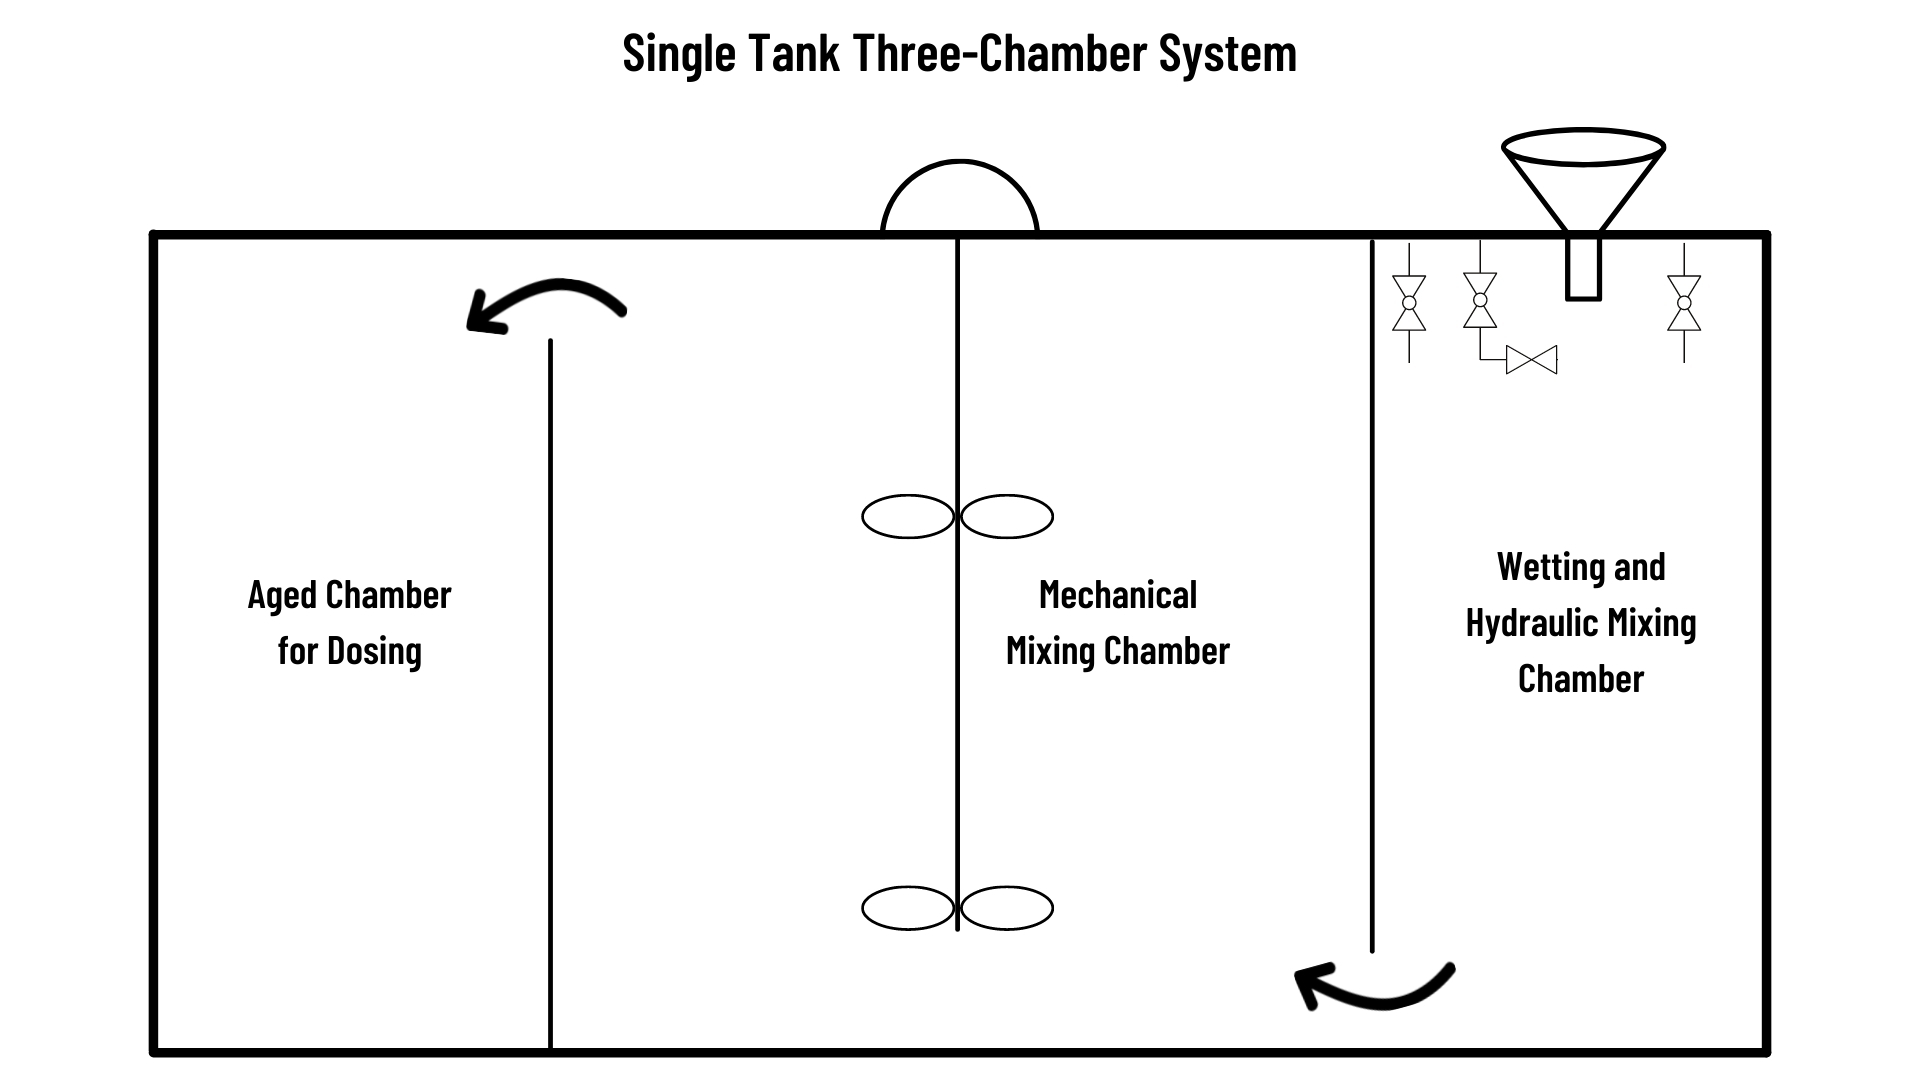 A simple drawing of polymer solution flow path through a single tank dry polymer preparation system.